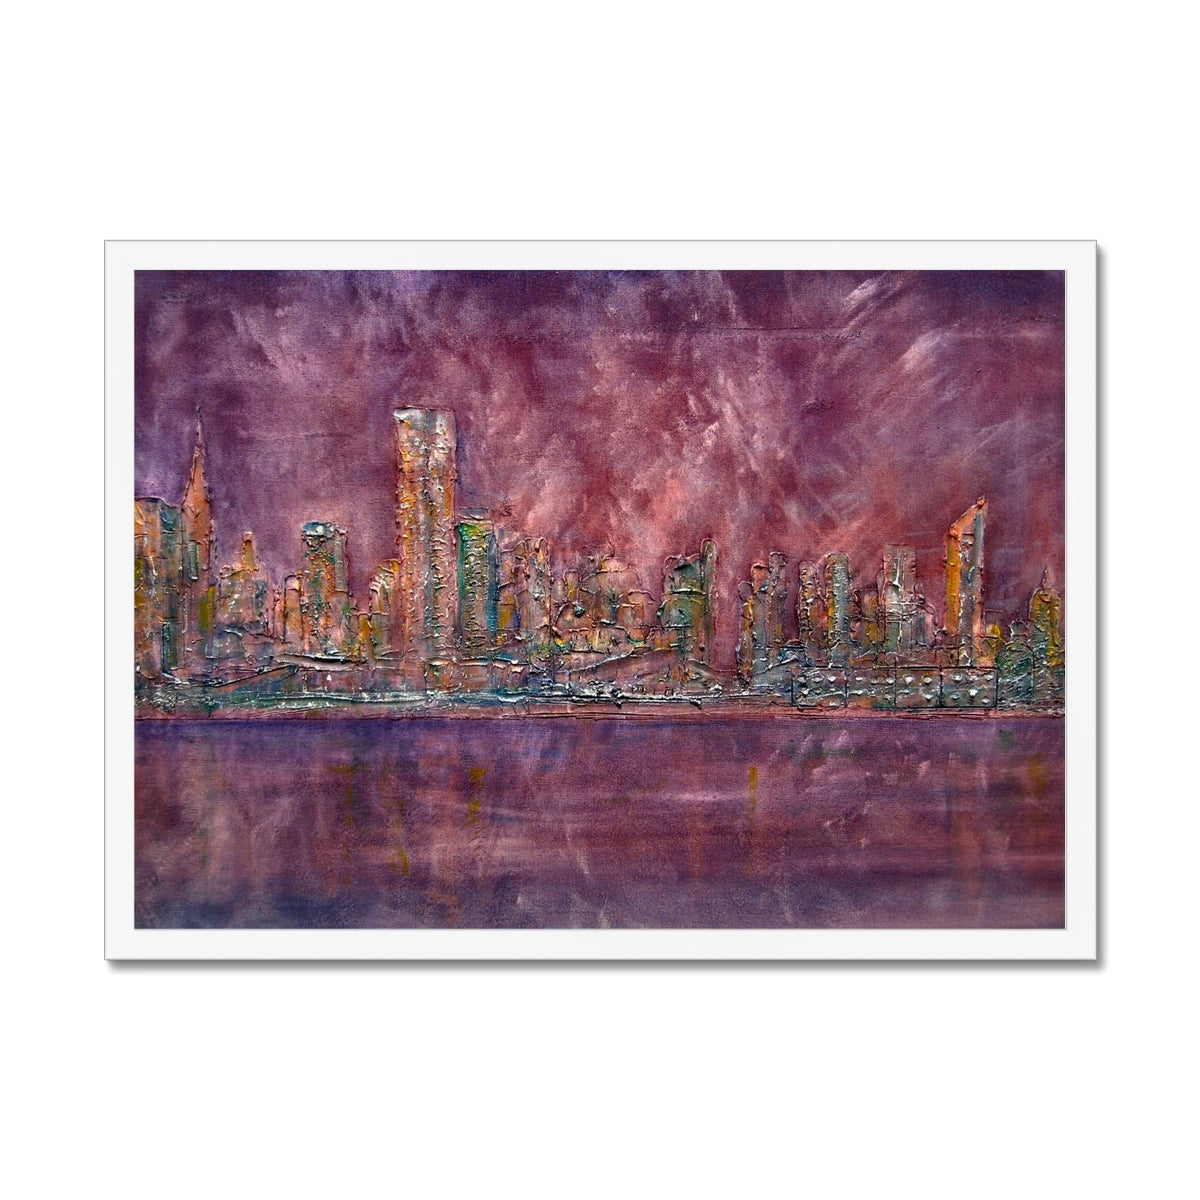 East Side Snow New York Painting | Framed Prints From Scotland-Framed Prints-World Art Gallery-A2 Landscape-White Frame-Paintings, Prints, Homeware, Art Gifts From Scotland By Scottish Artist Kevin Hunter